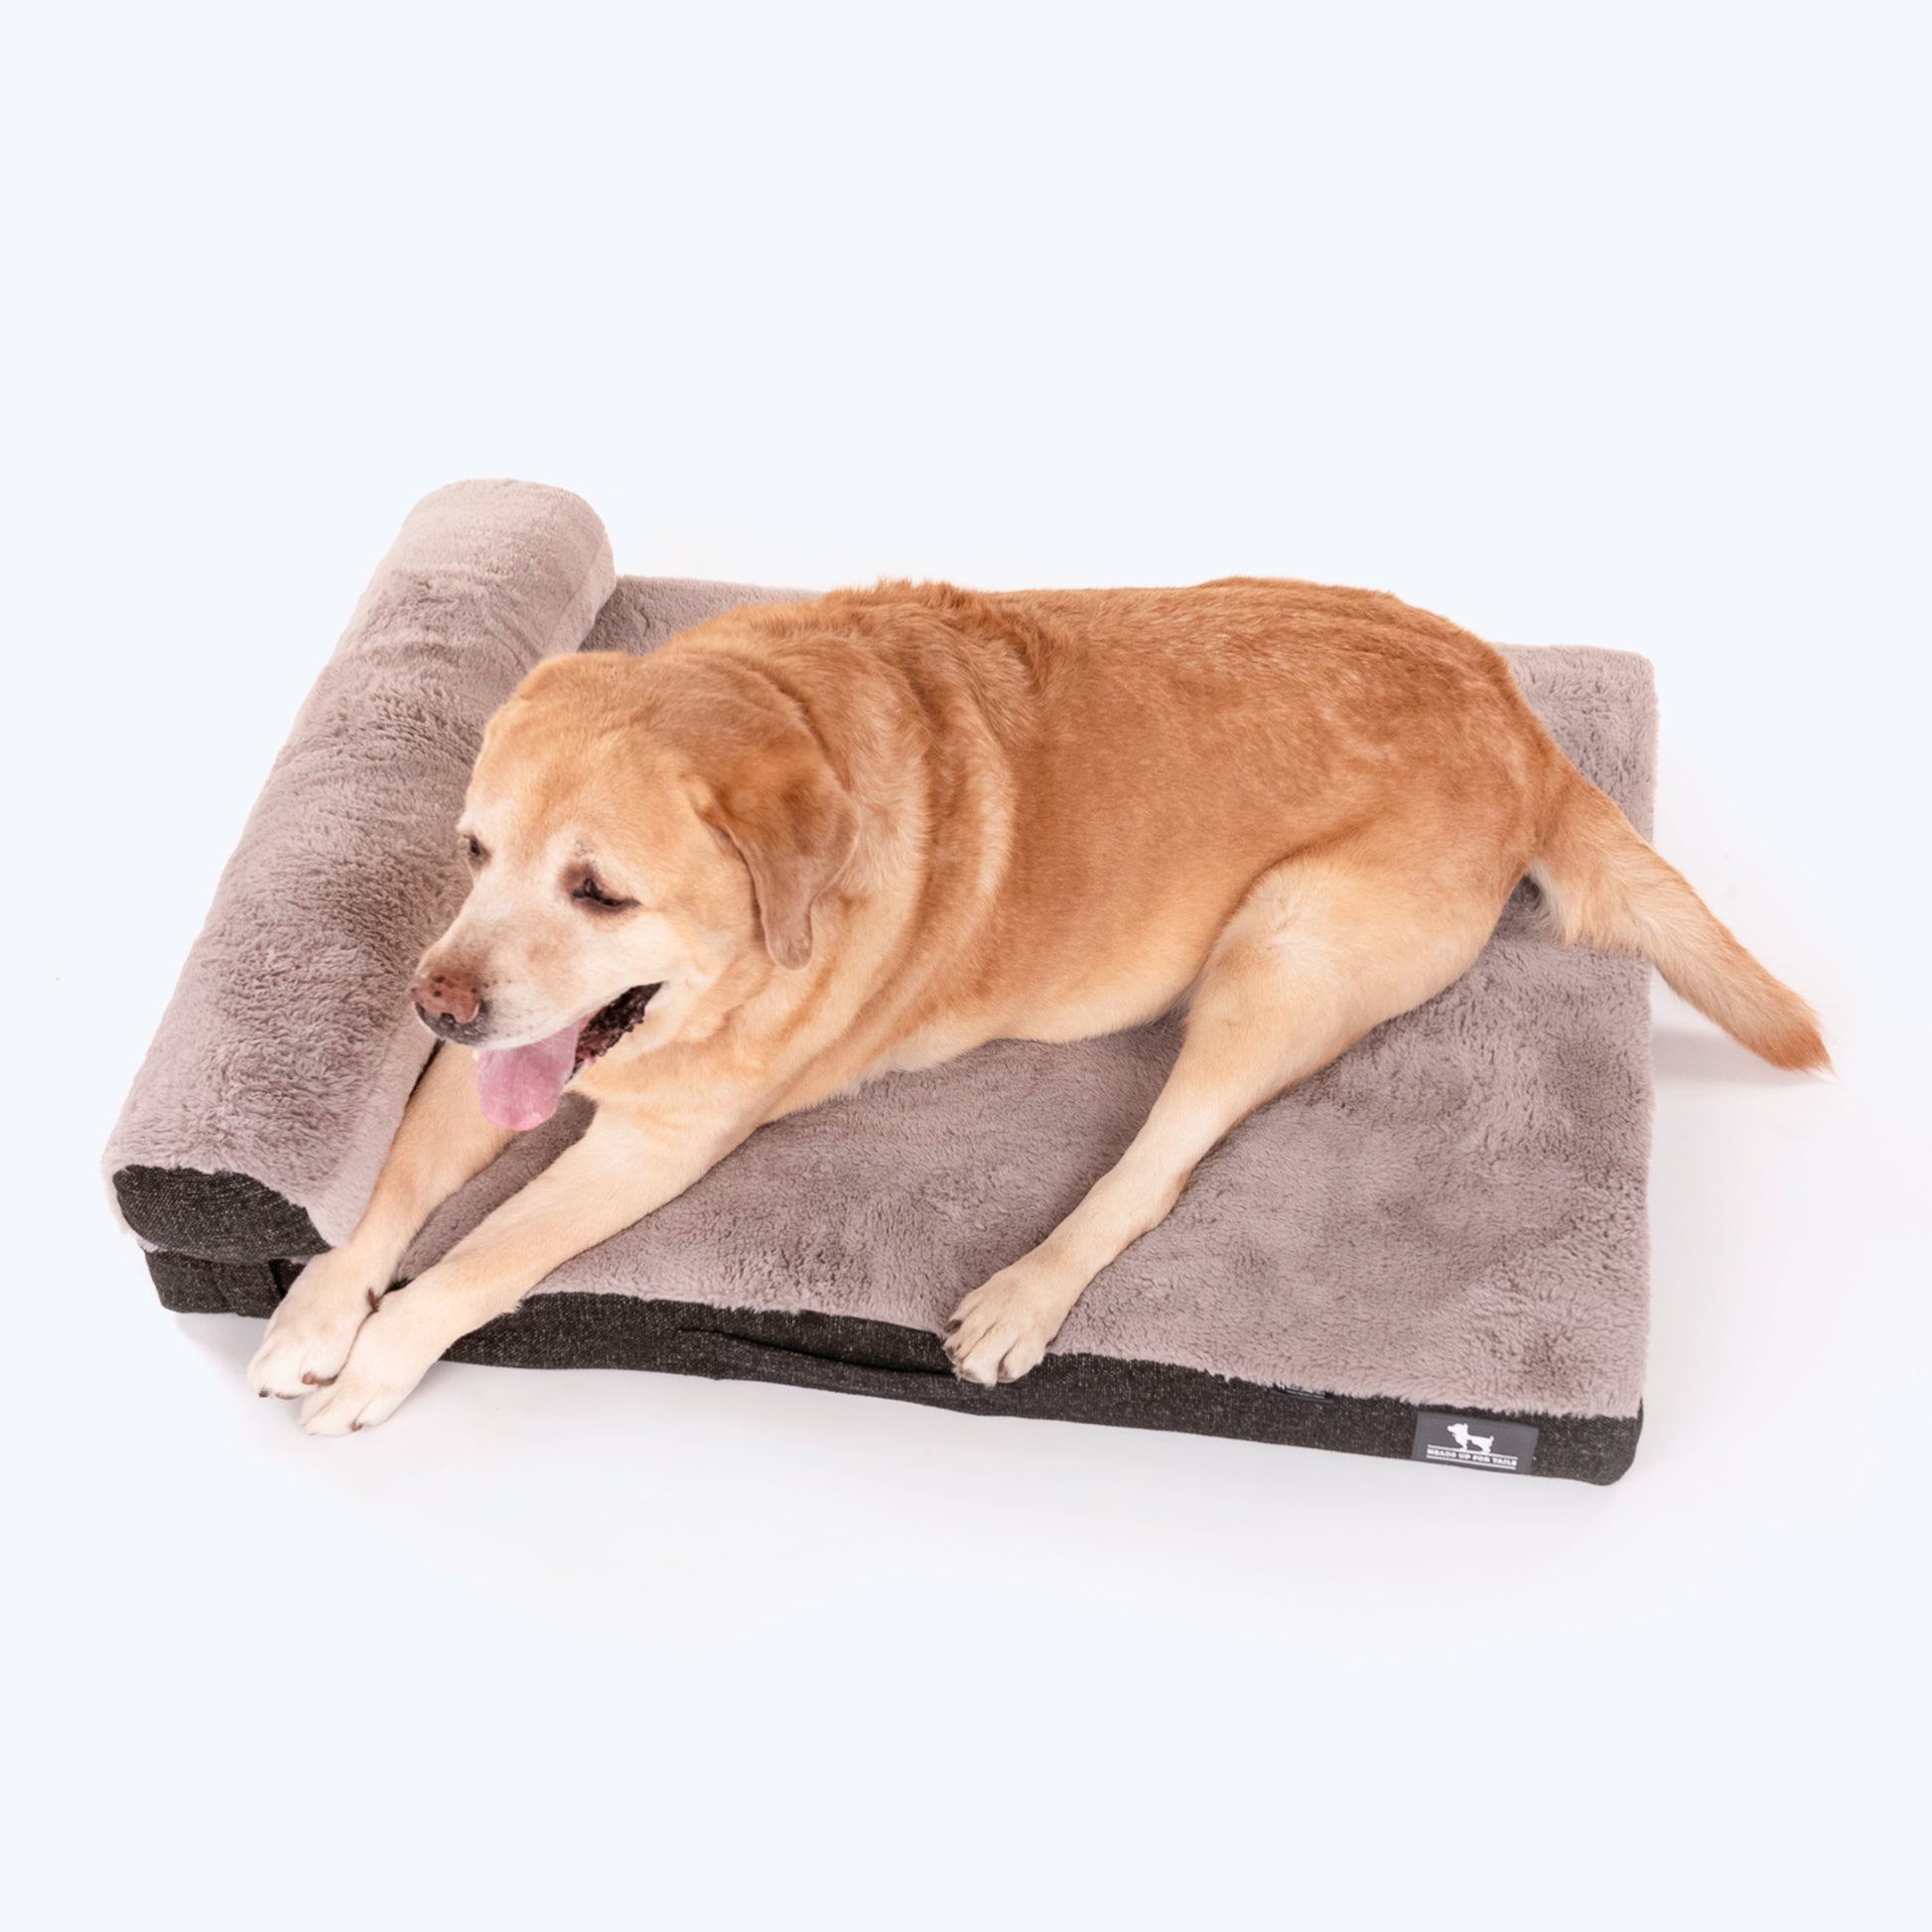 HUFT Furry Orthopedic Dog Bed - Grey (Made To Order) - Heads Up For Tails